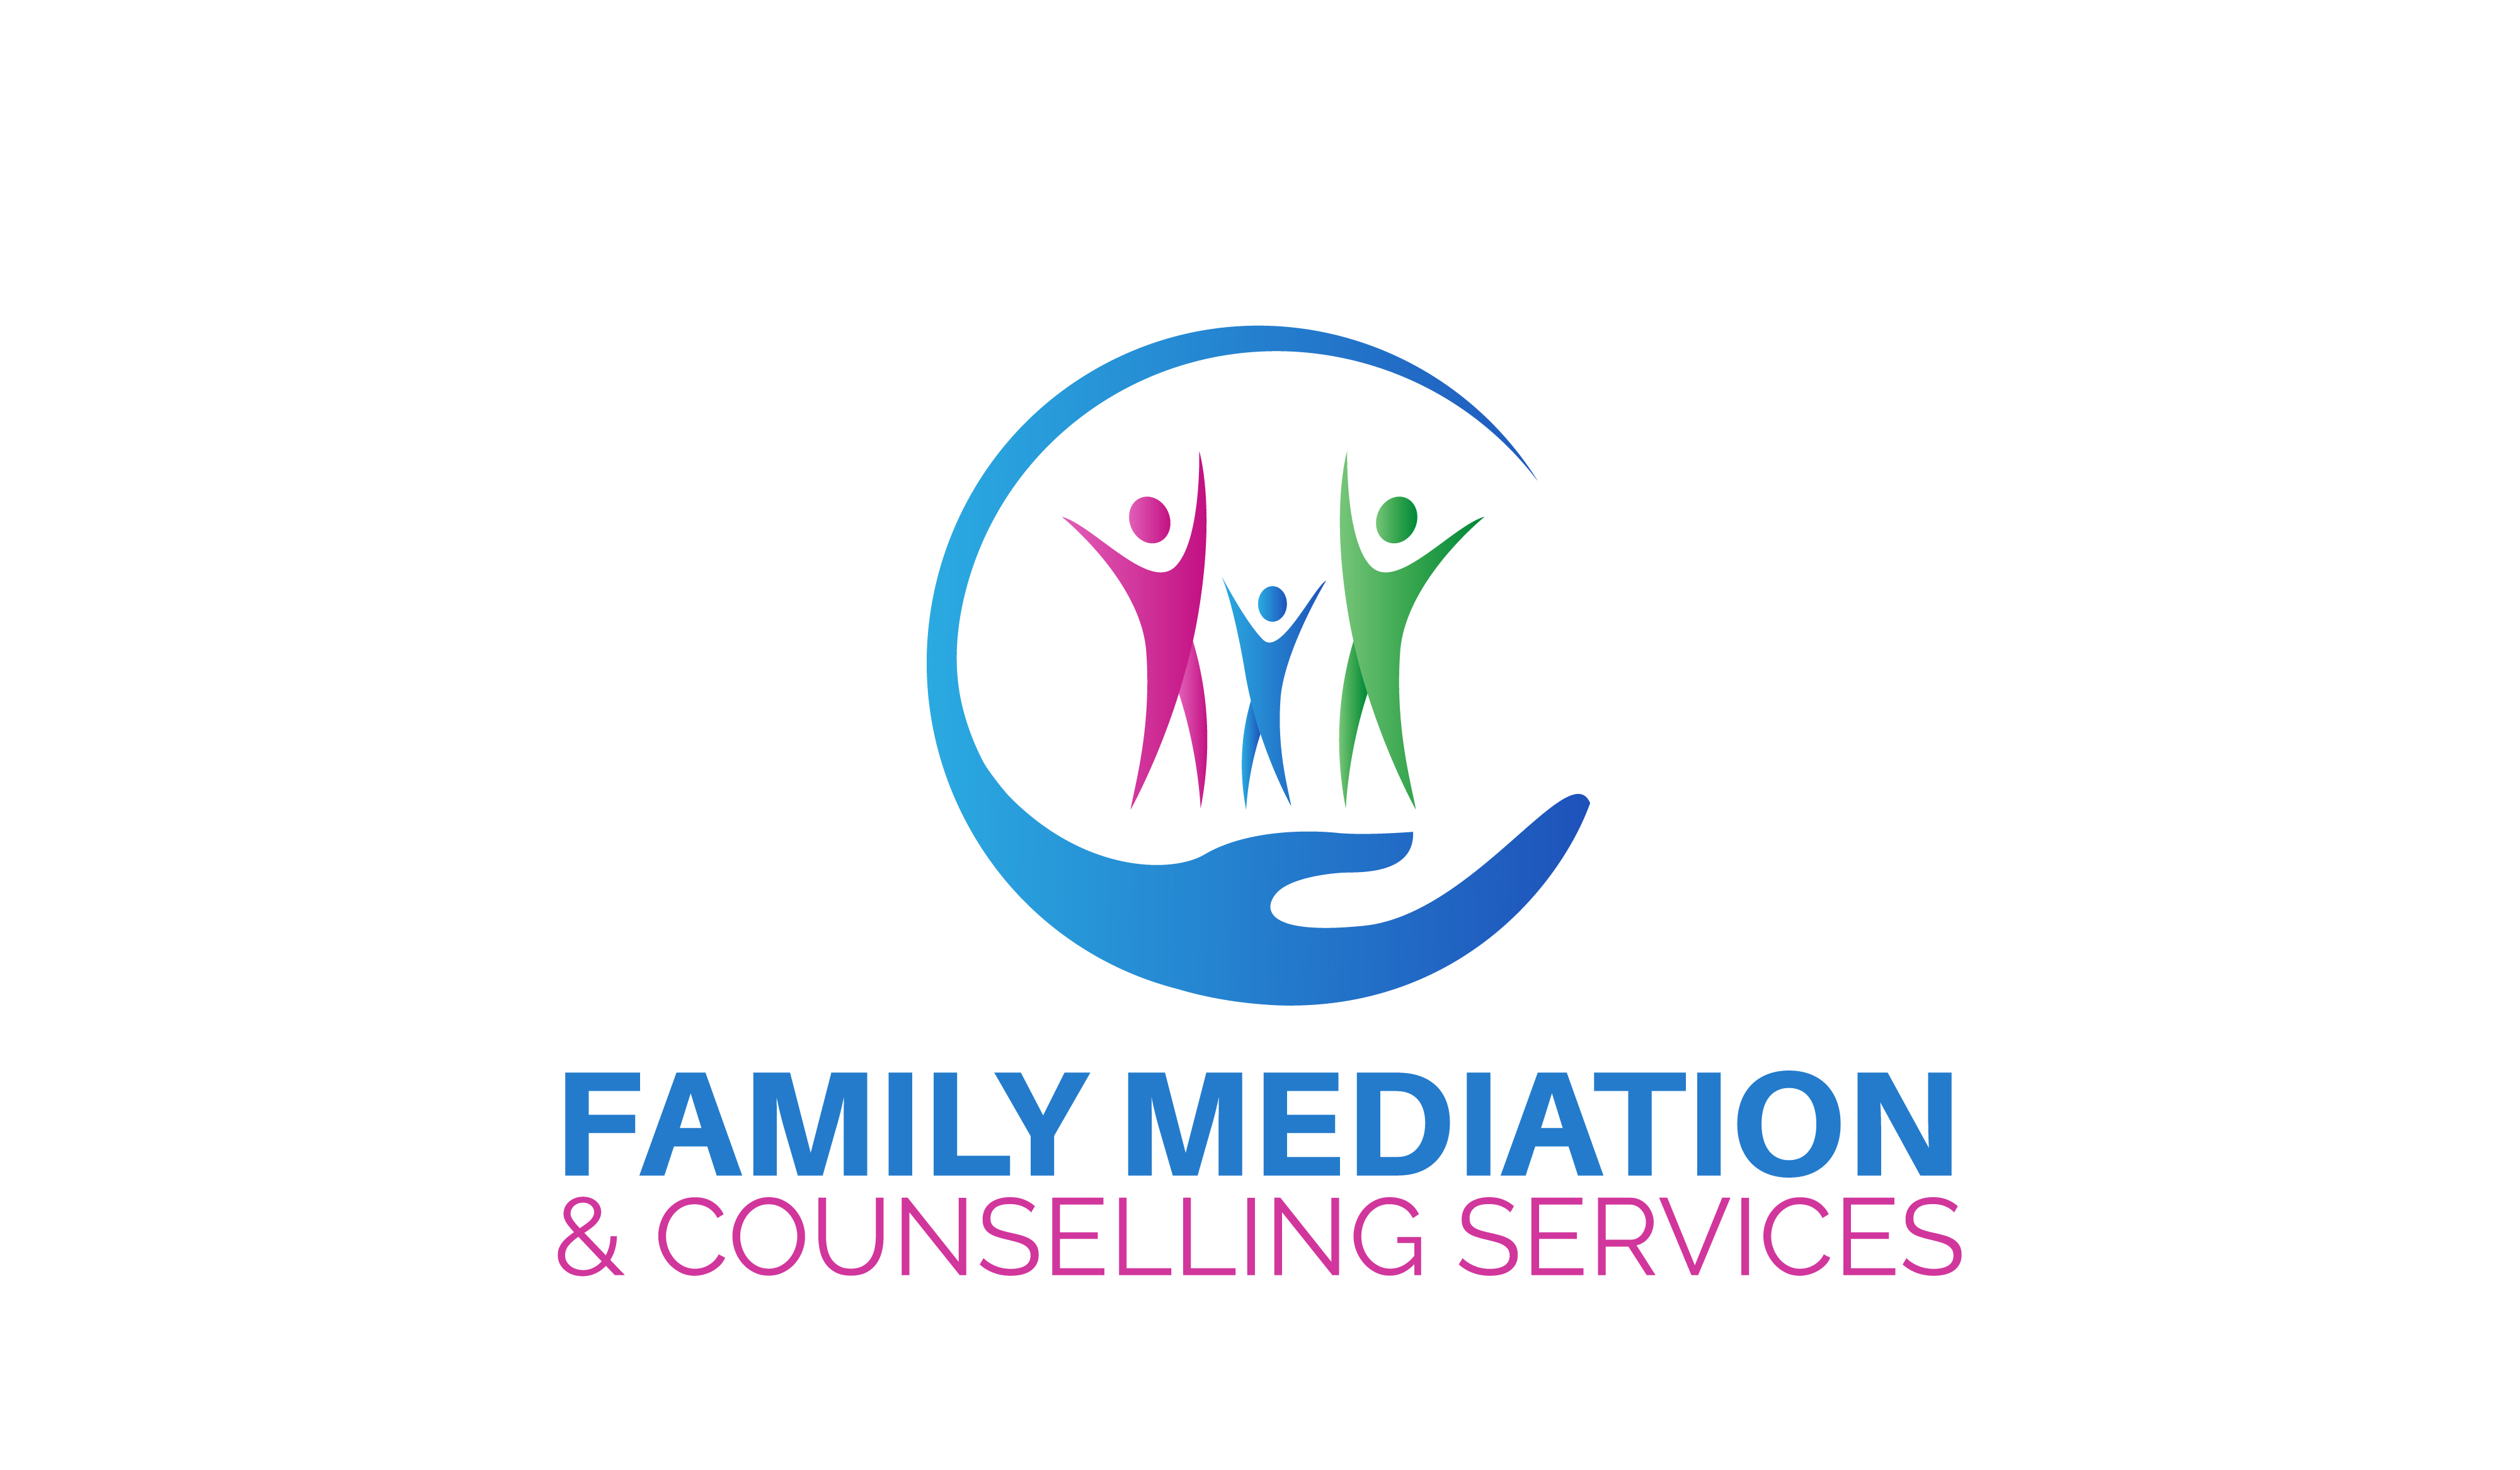 Family Mediation & Counselling Services review